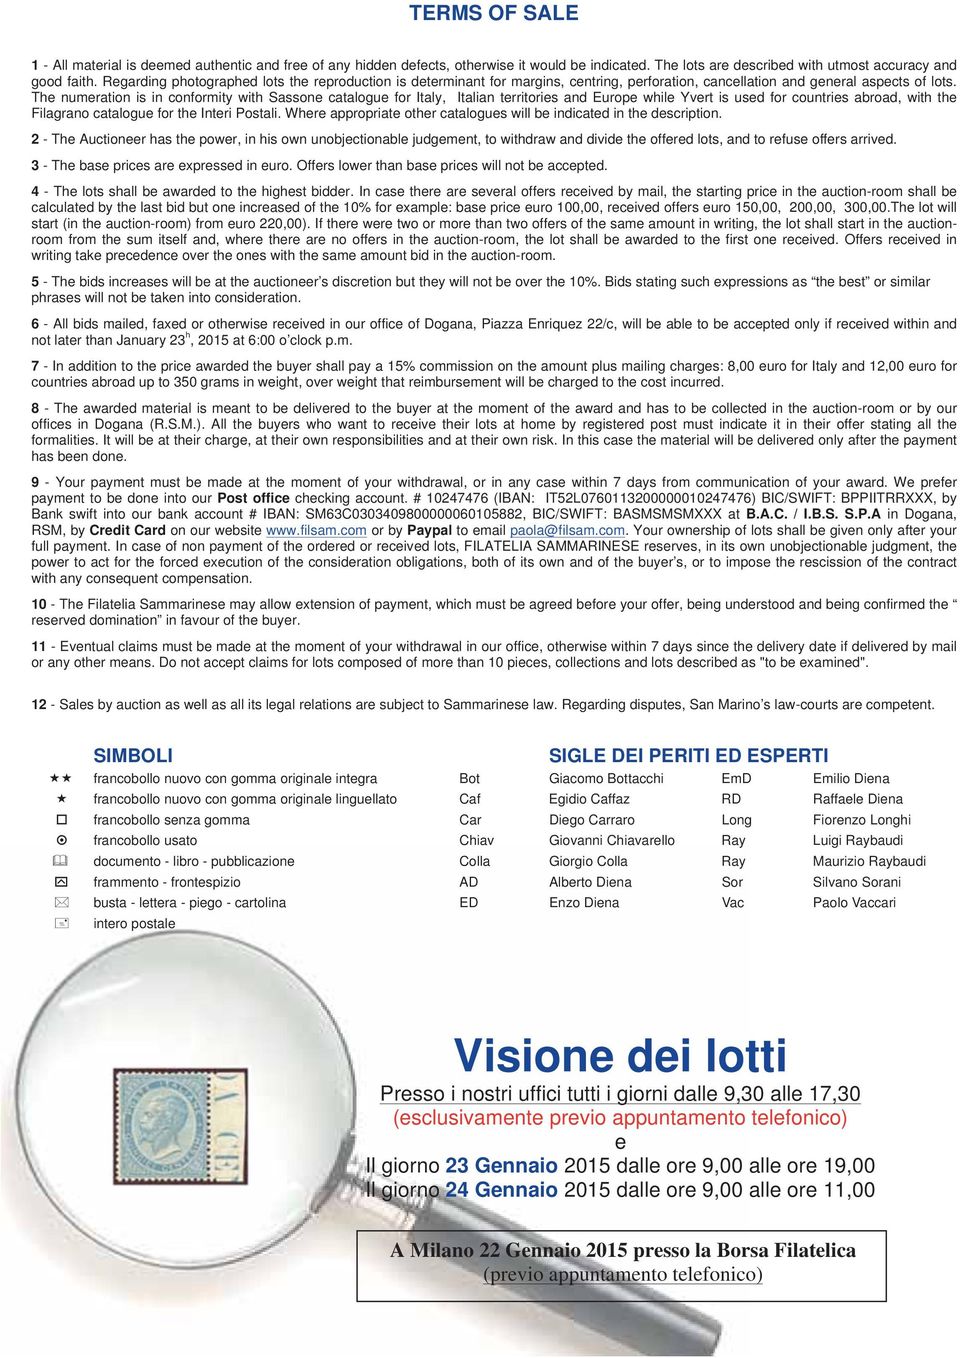 The numeration is in conformity with Sassone catalogue for Italy, Italian territories and Europe while Yvert is used for countries abroad, with the Filagrano catalogue for the Interi Postali.